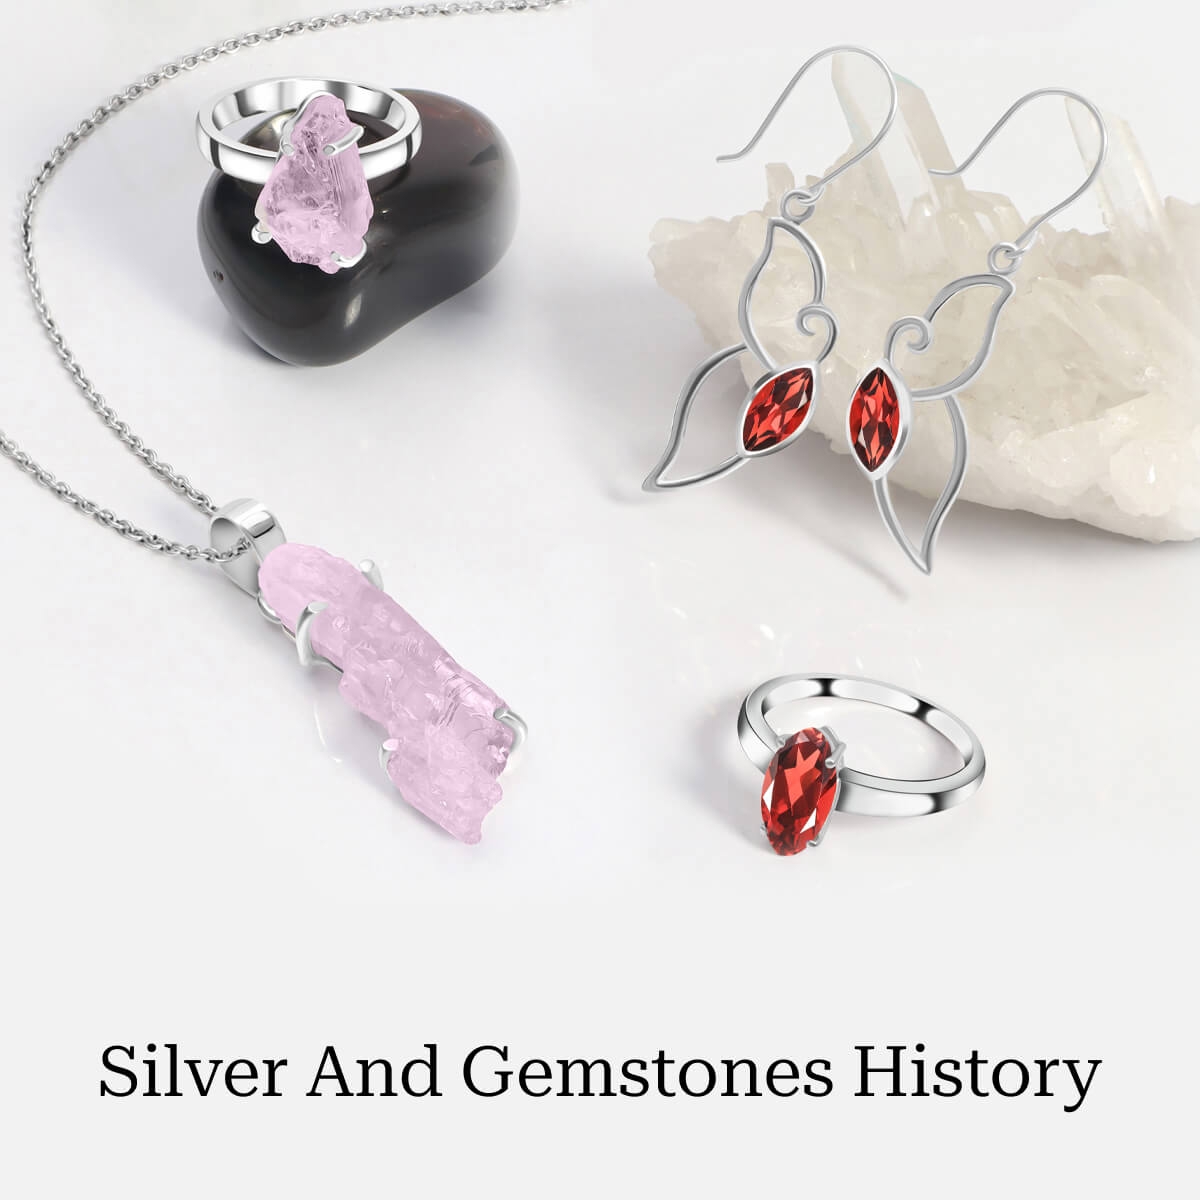 History Of Silver And Gemstones